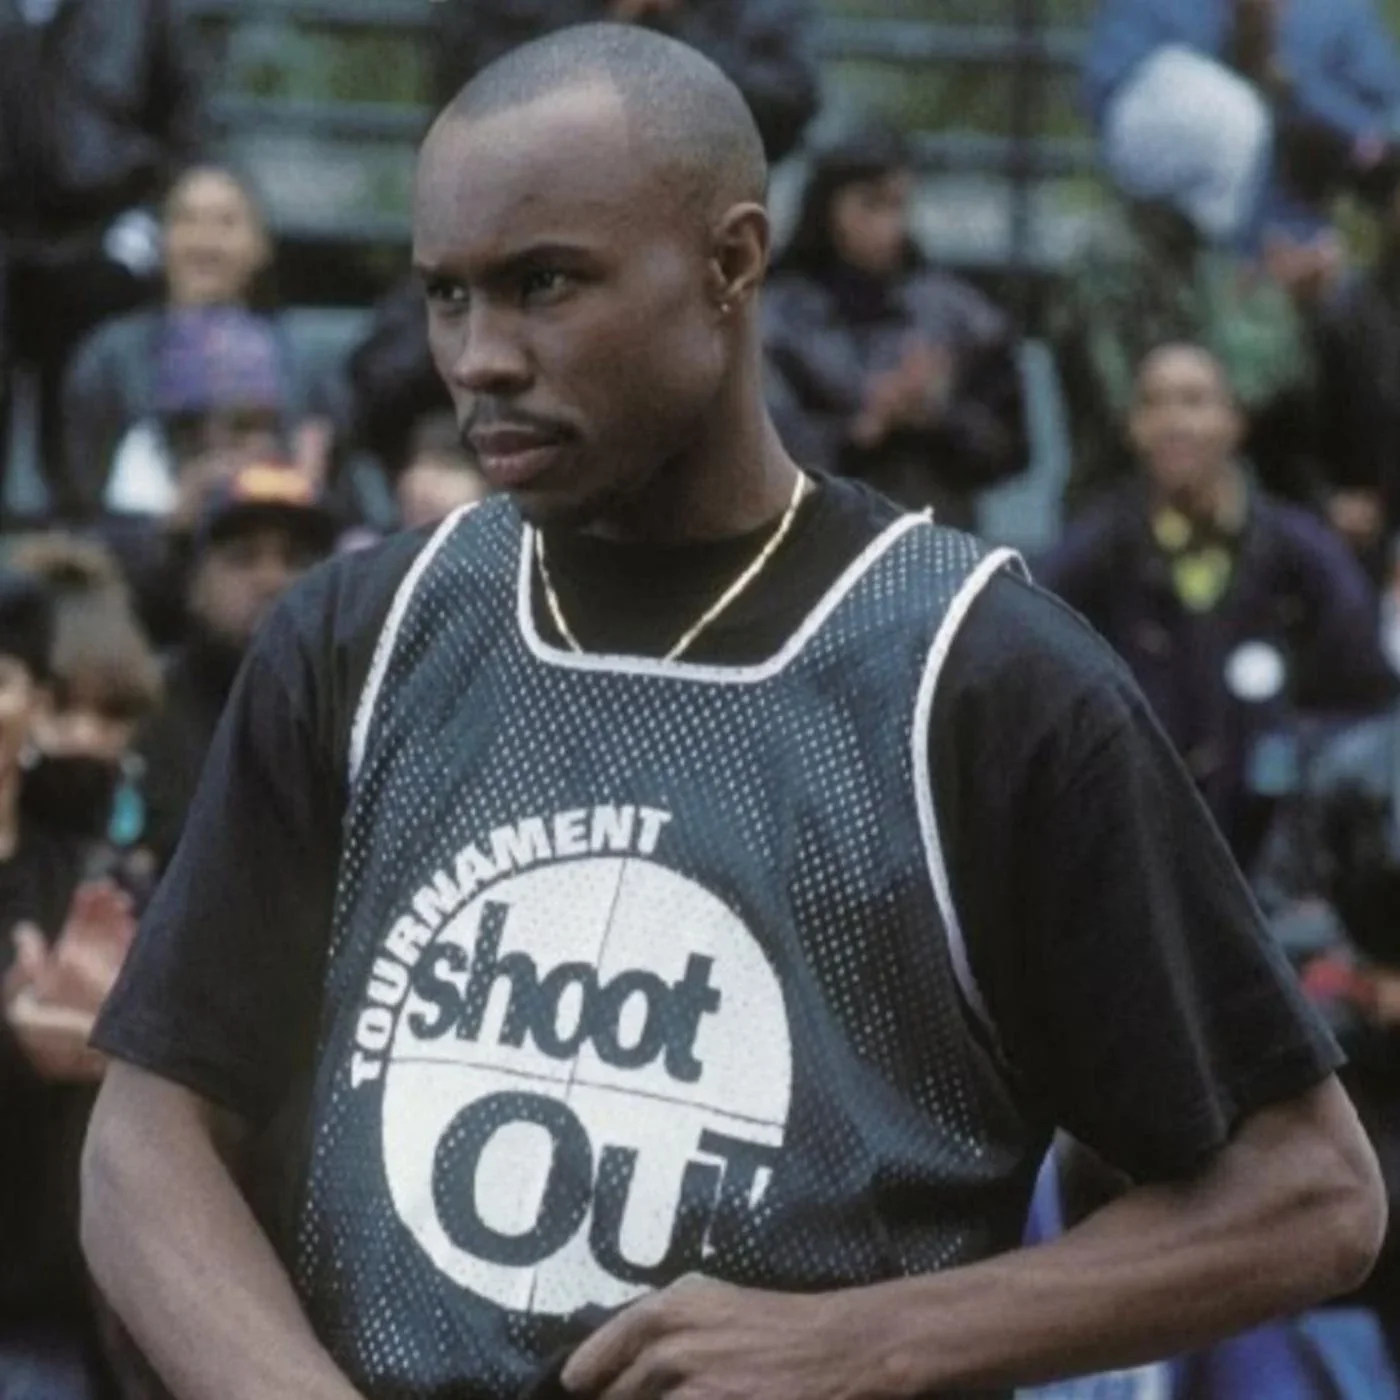 Above The Rim Turns 30: See The Cast Then And Now